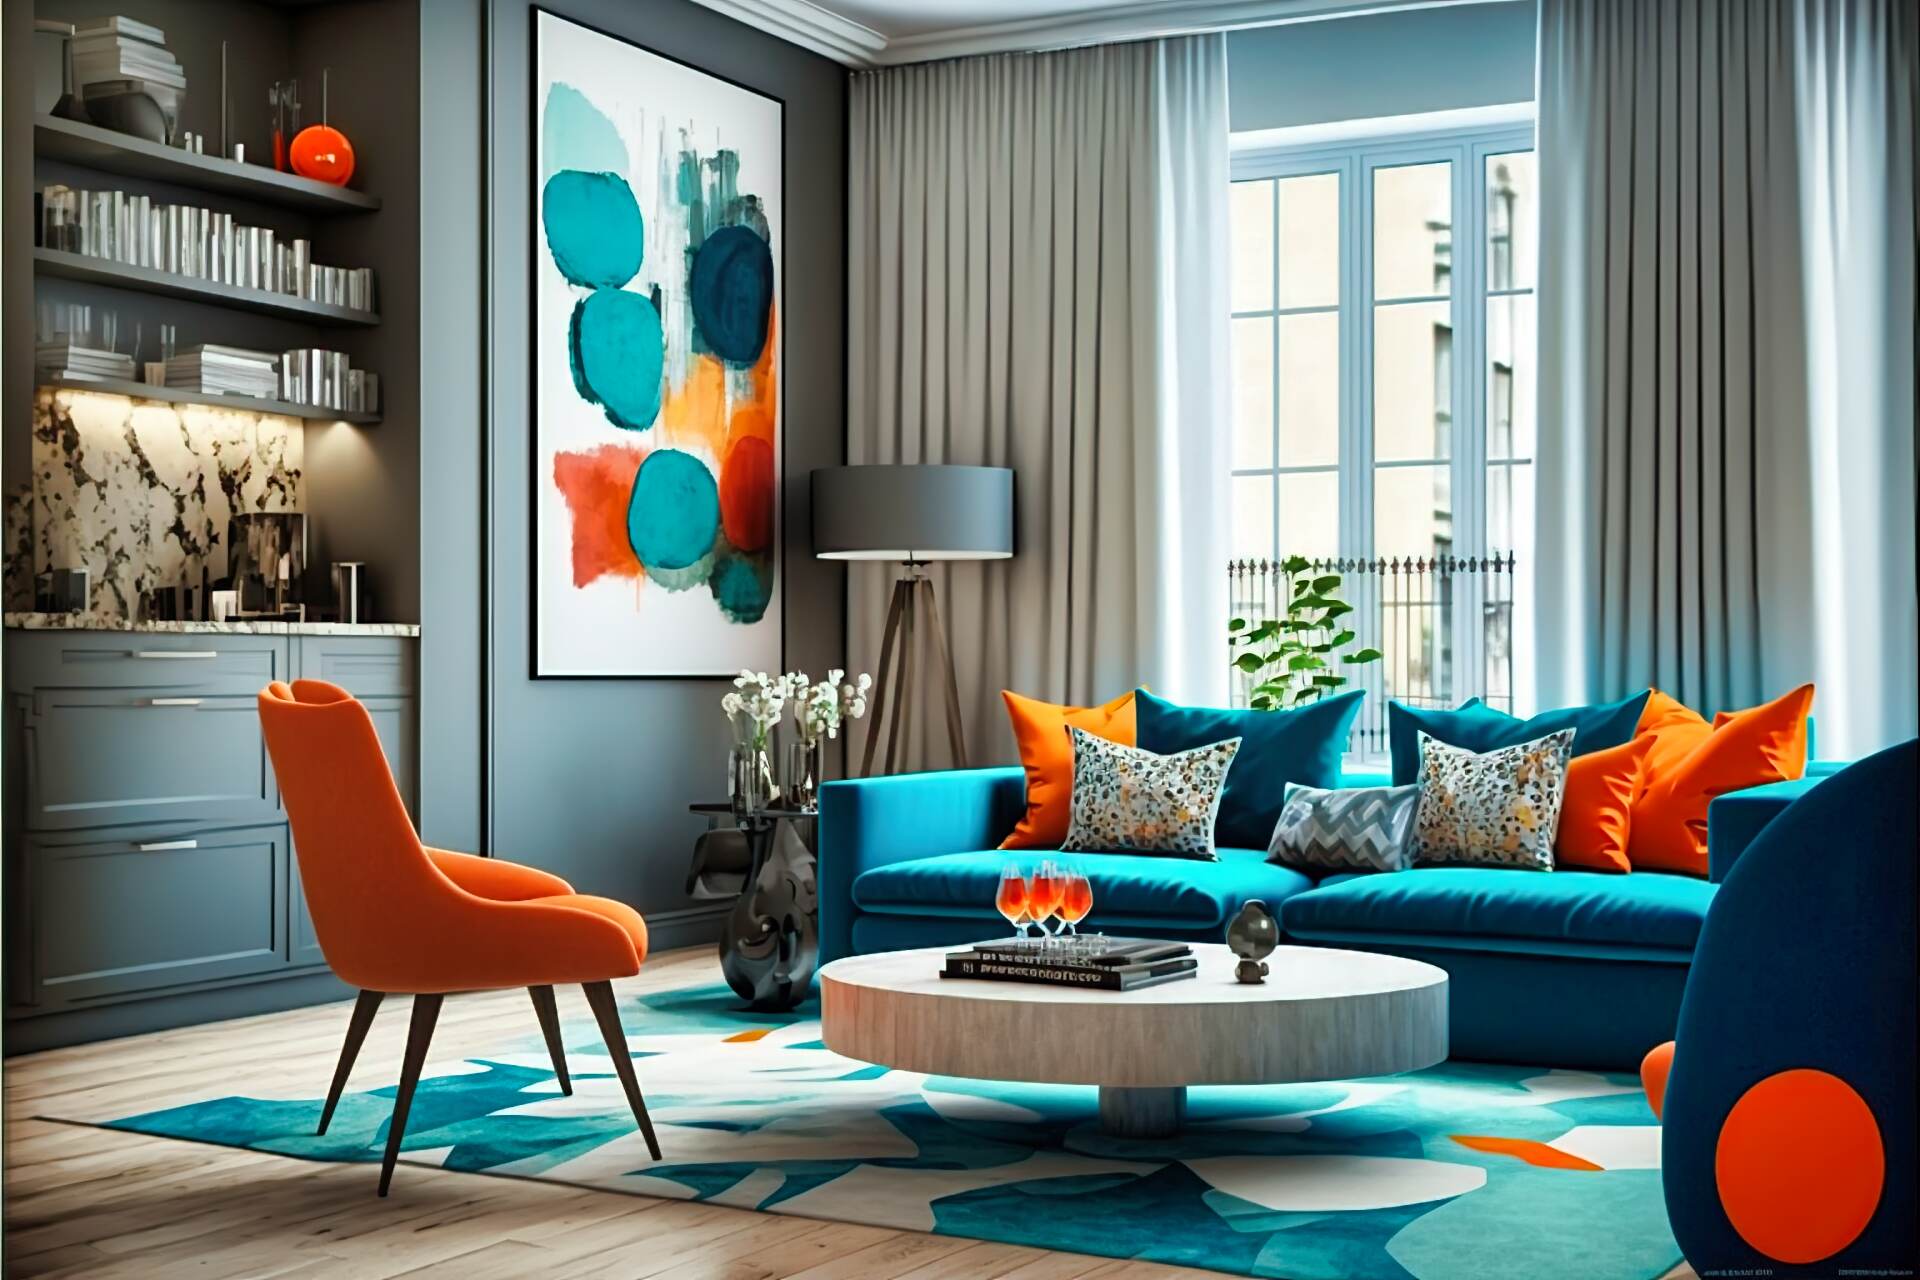 This Modern Living Room Features Bold Colors And Plenty Of Texture. A Bright Orange Armchair And A Bright Blue Sofa Provide A Comfortable Seating Area, While A Colorful Geometric Rug And A Modern Coffee Table Complete The Look. A Few Interesting Art Pieces And A Large Wall Mirror Add A Contemporary Touch To The Room.